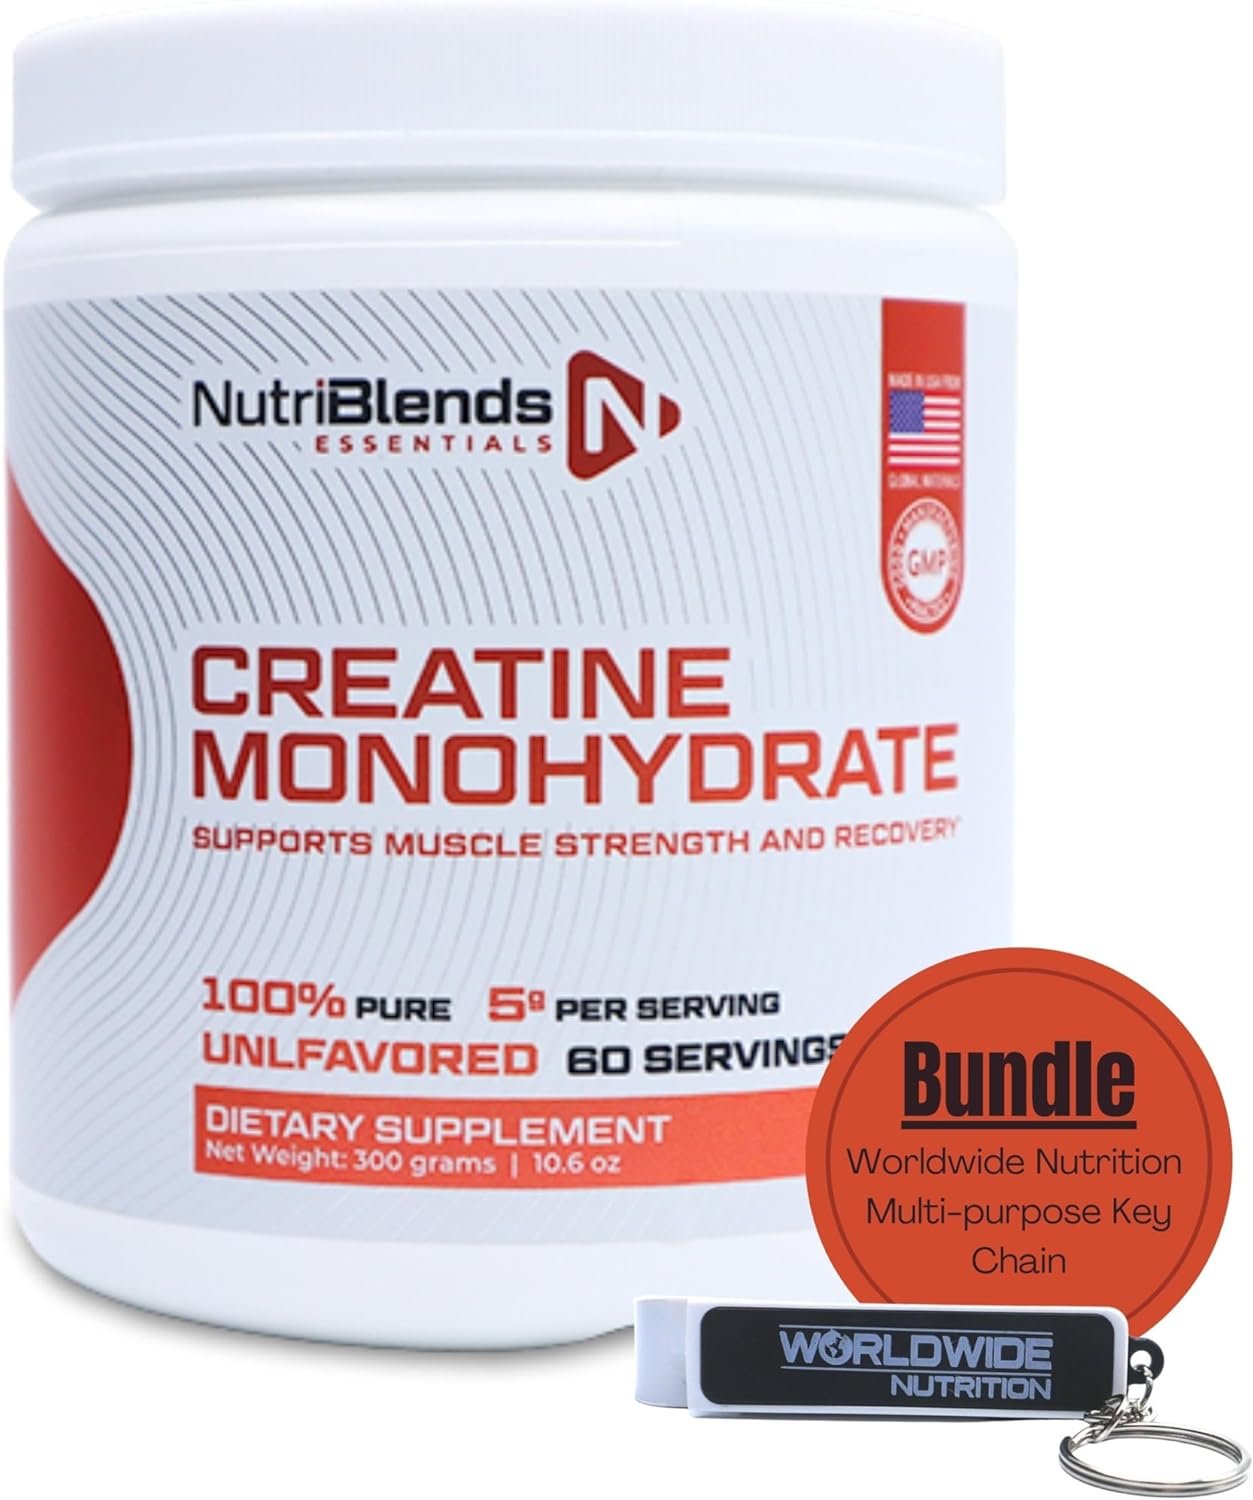 Micronized Creatine Monohydrate Powder 5000mg Per Serv (5g), Keto Friendly  Workout Supplement, Supports Muscle Growth, Strength & Recovery - Pure